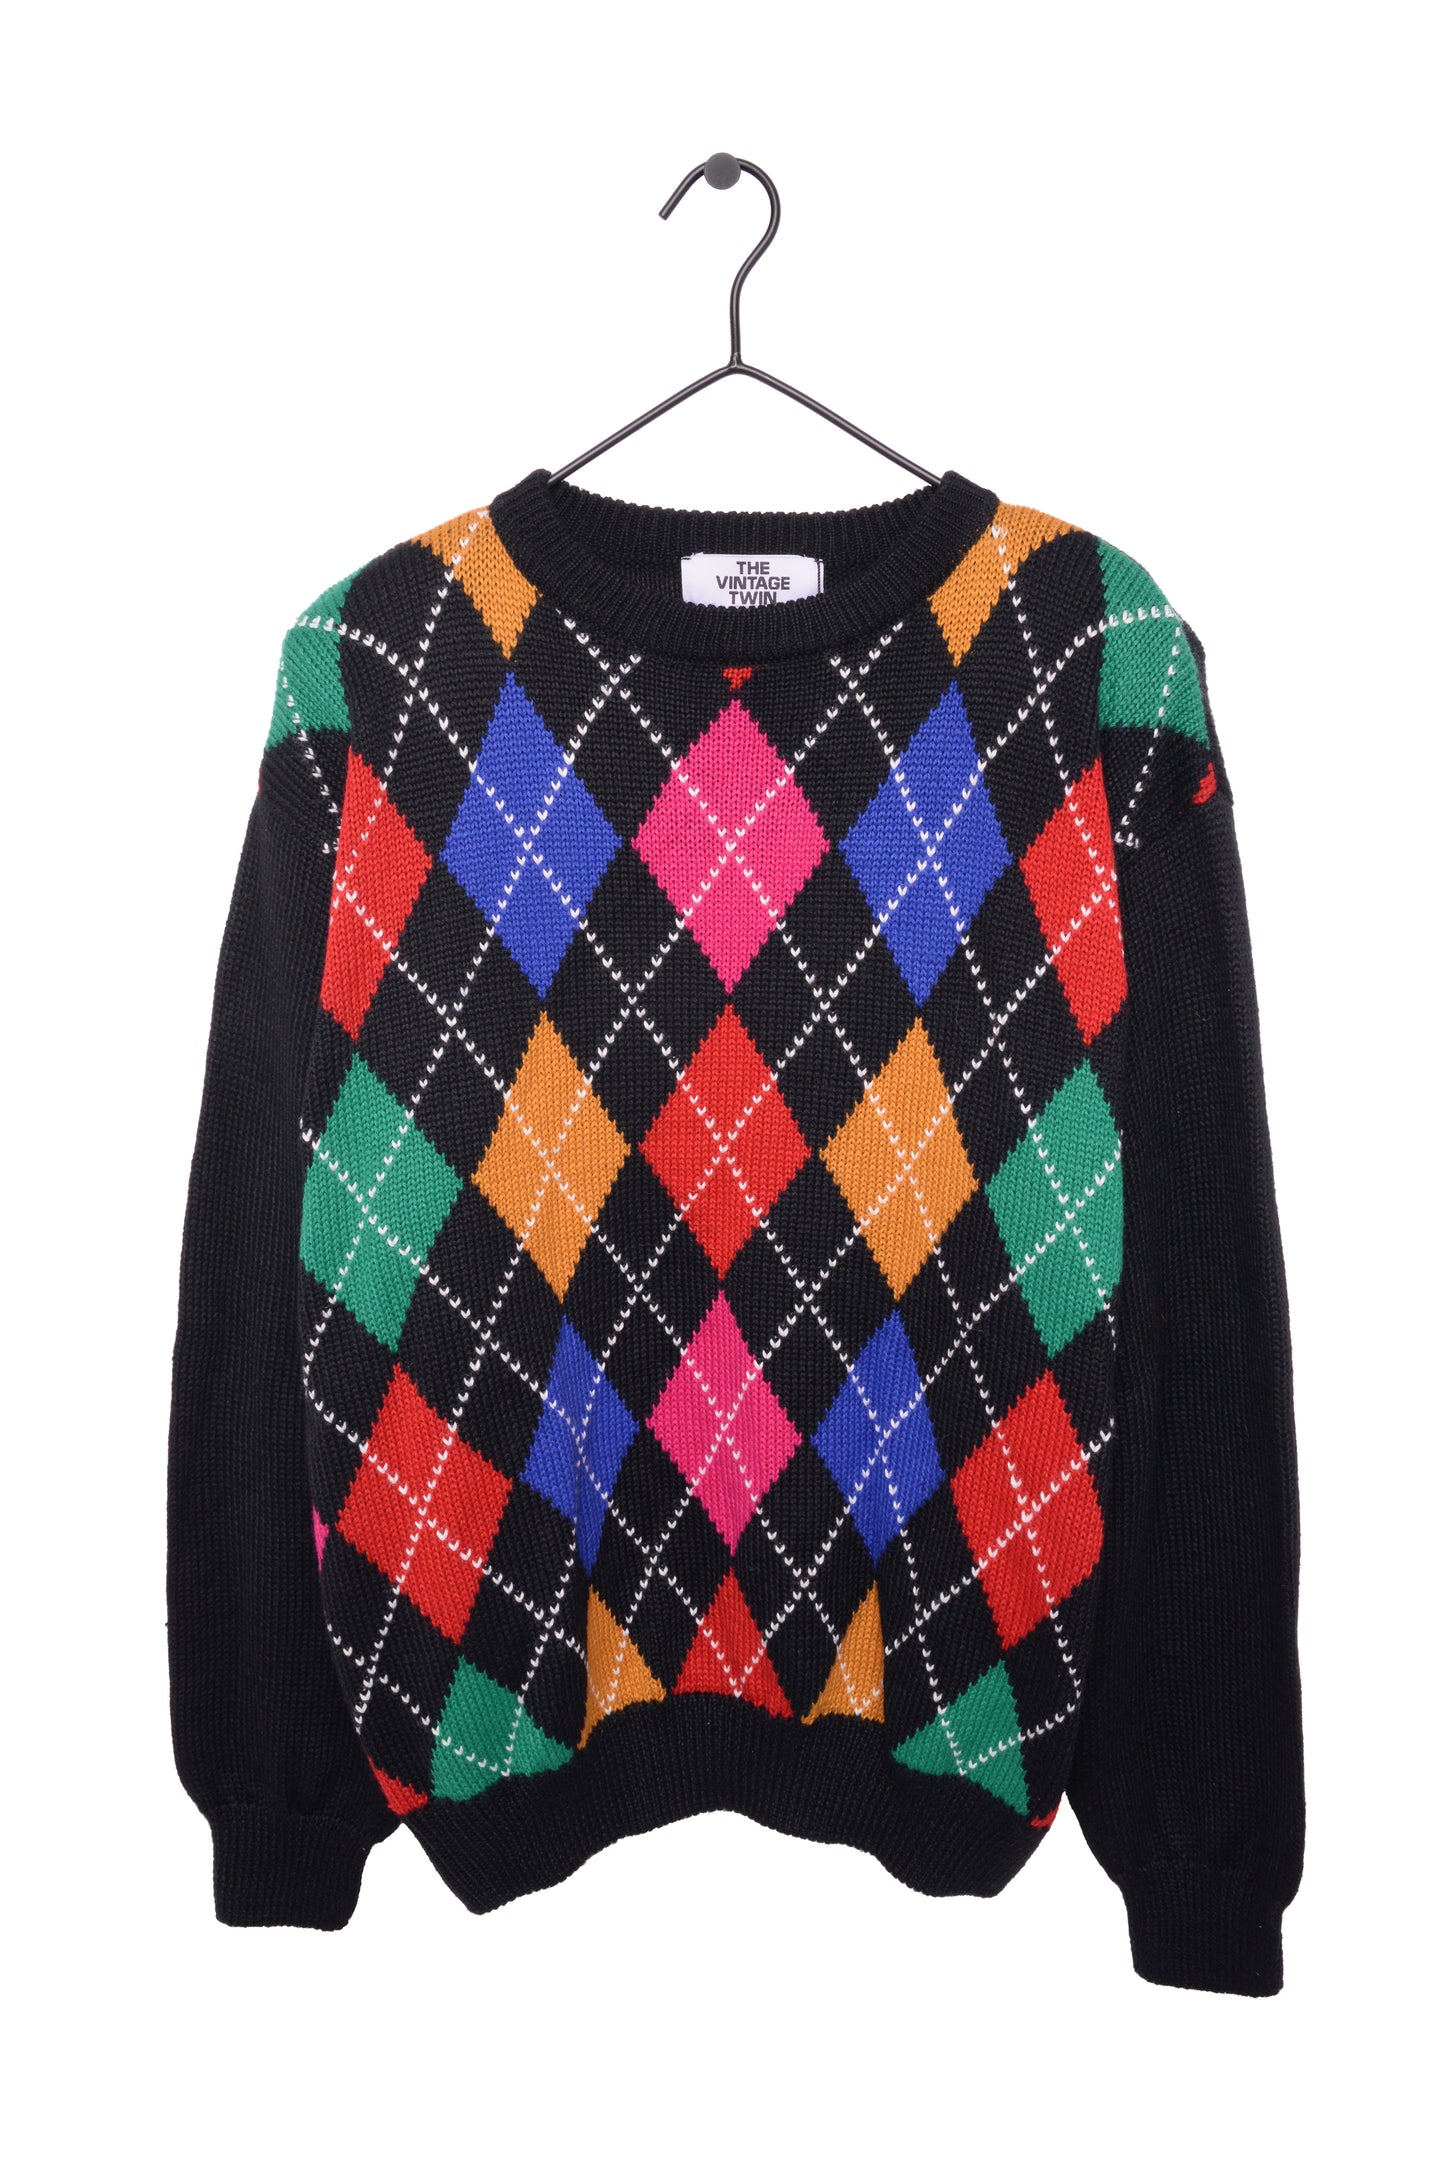 Wool Argyle Sweater Free Shipping - The Vintage Twin